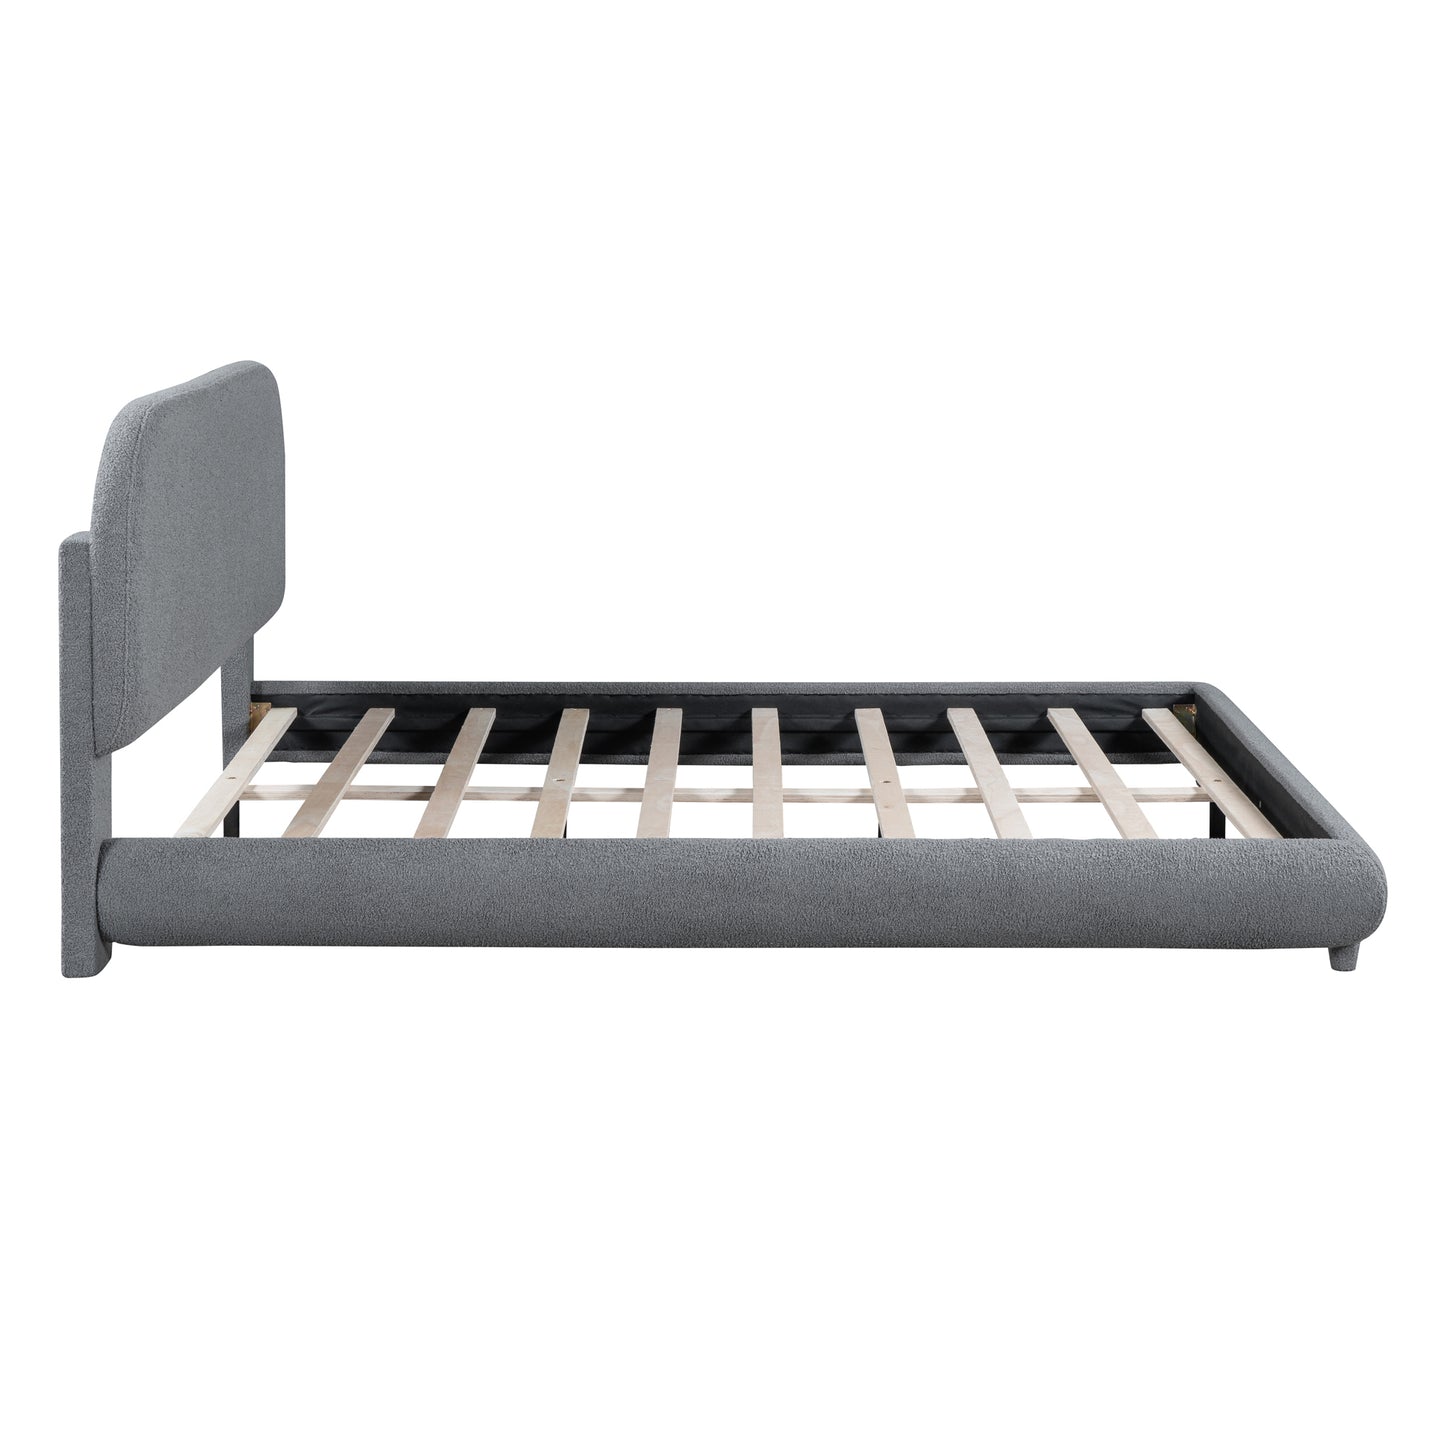 Teddy Fleece Queen Size Upholstered Platform Bed with Thick Fabric, Solid Frame and Stylish Curve-shaped Design, Gray